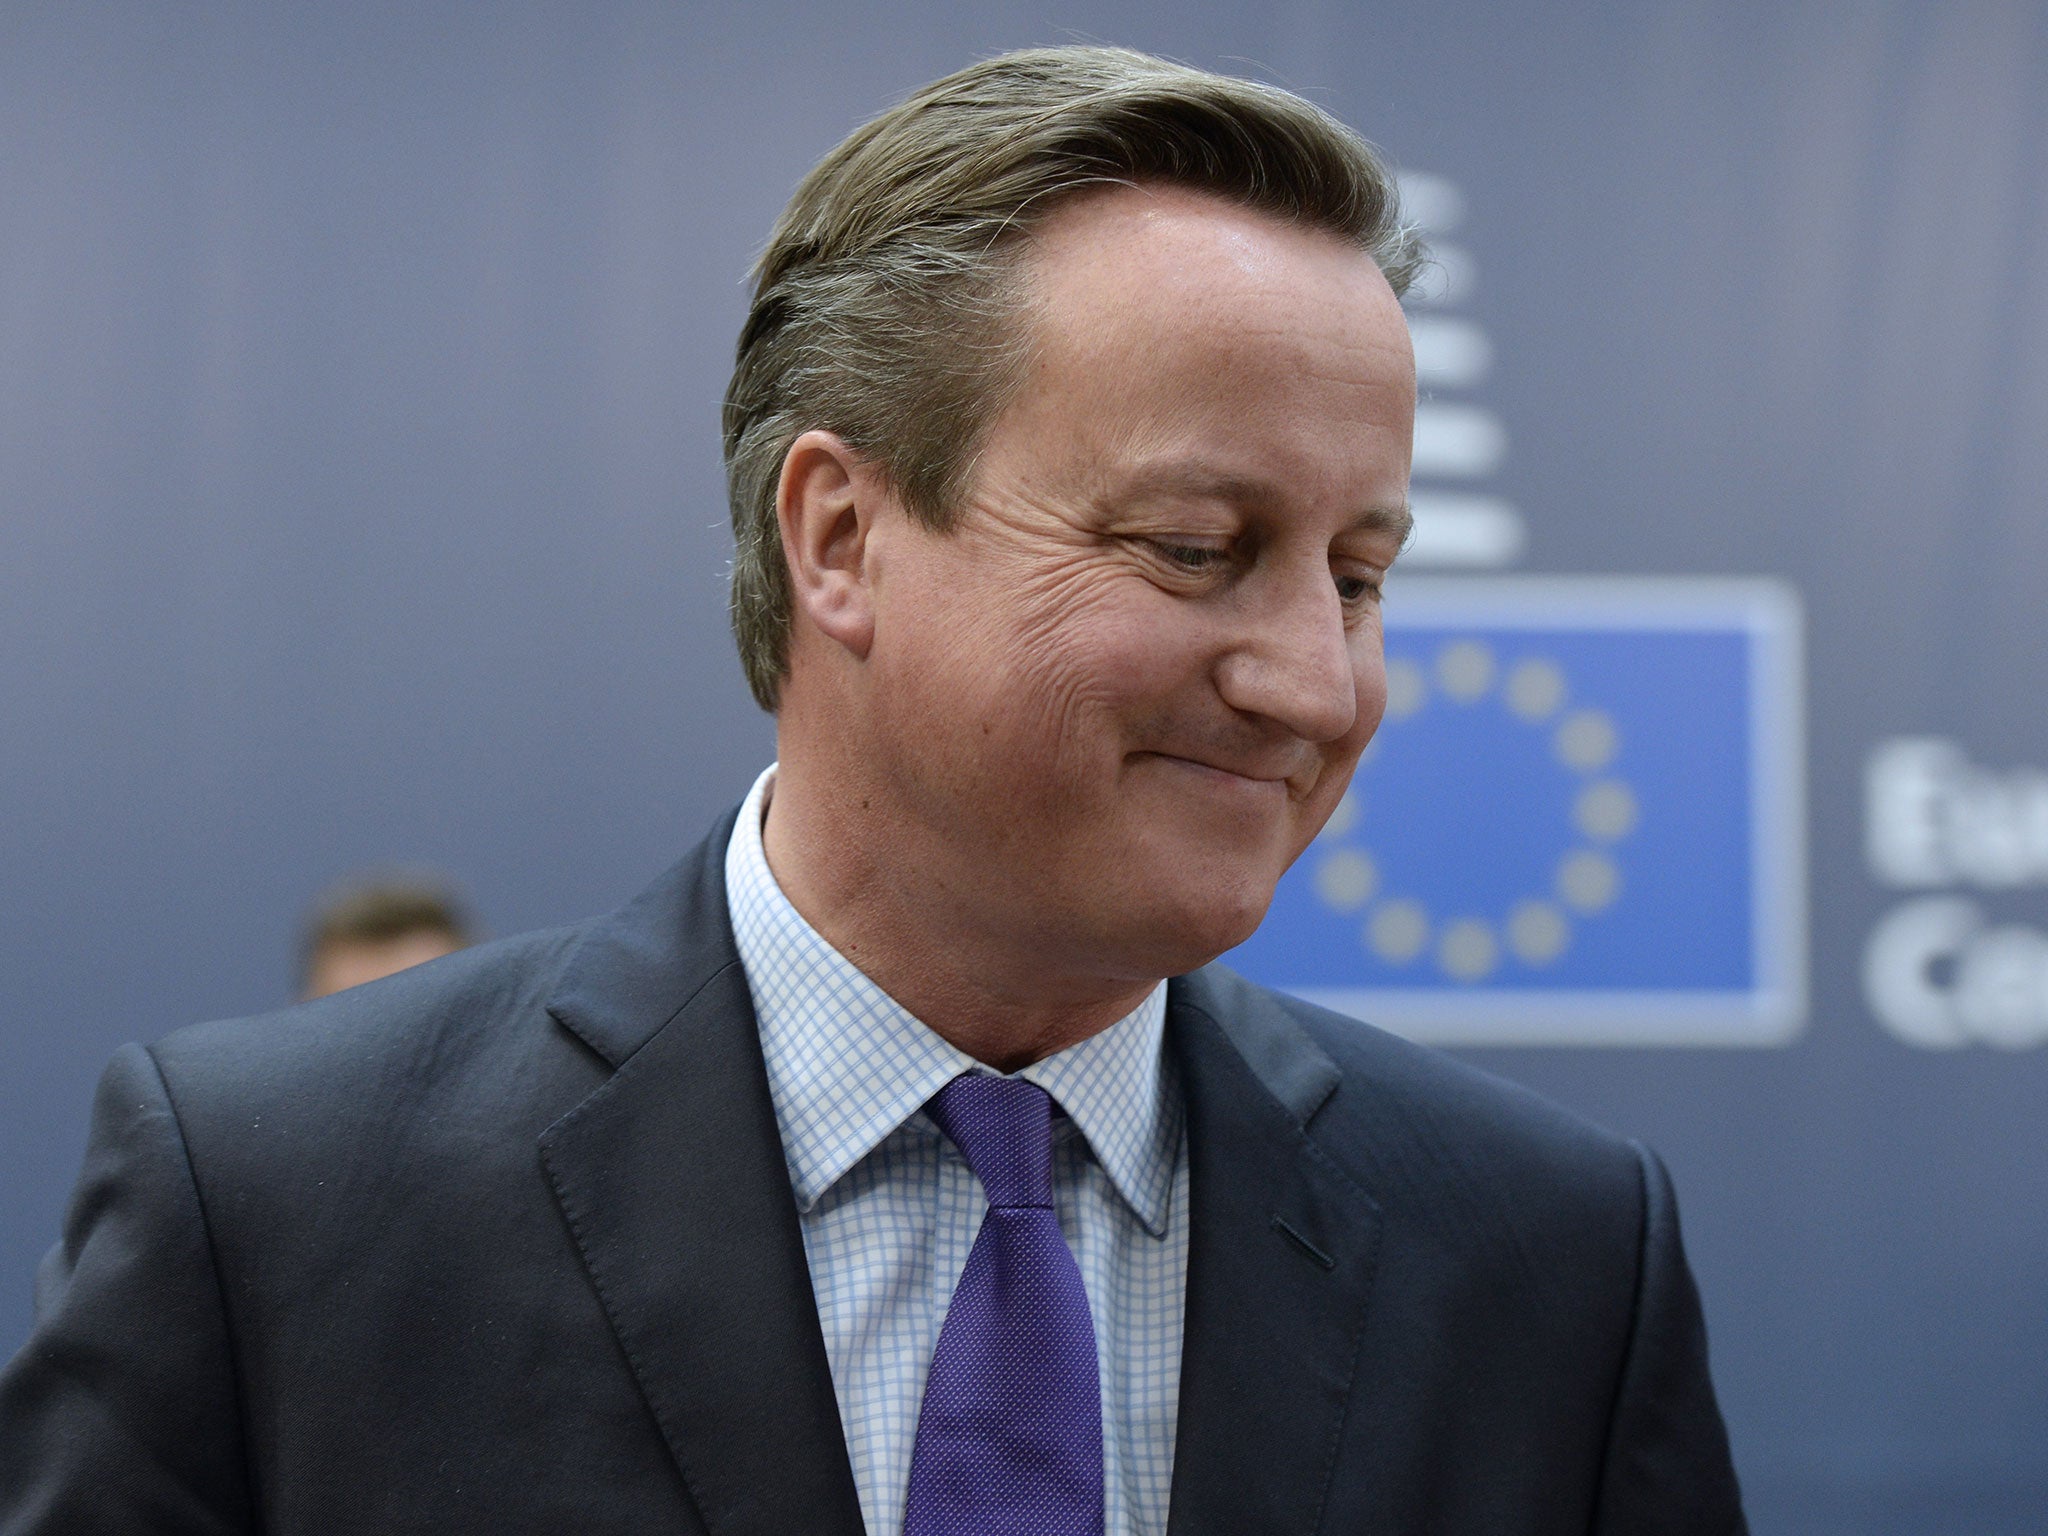 A deal could be struck by David Cameron by next month